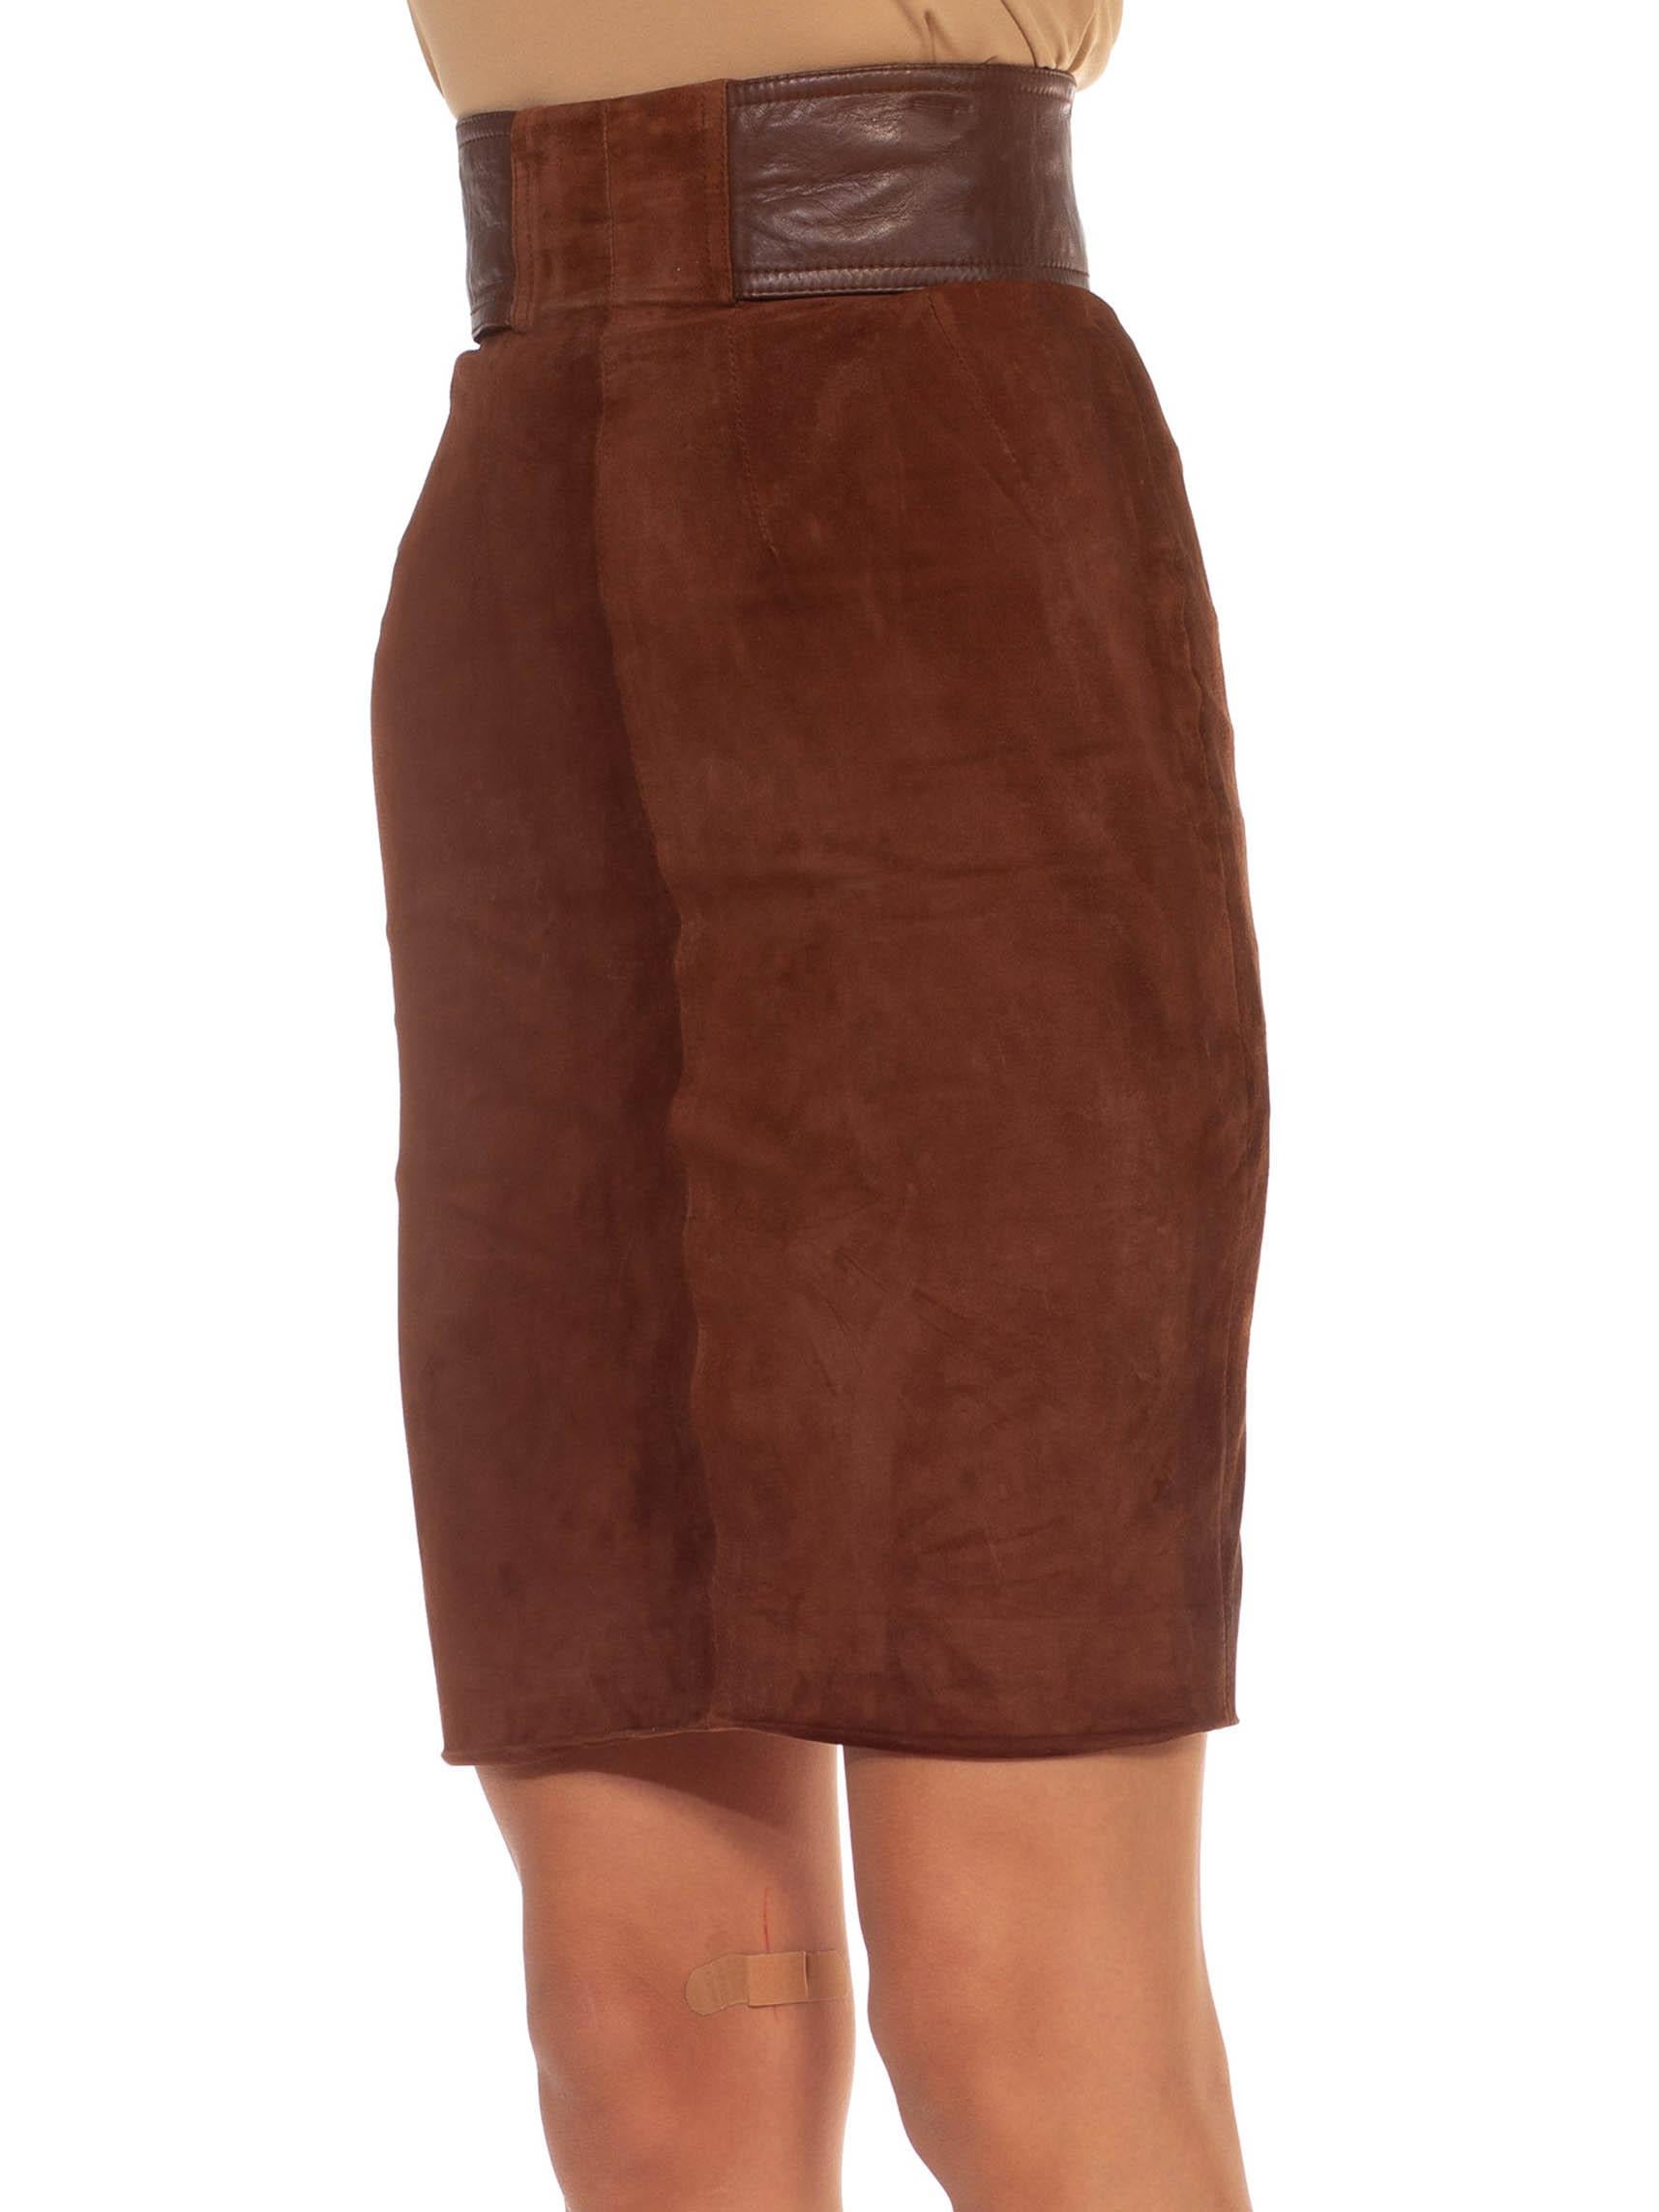 1970S GUCCI Chocolate Brown Suede & Leather Belted Skirt In Excellent Condition For Sale In New York, NY